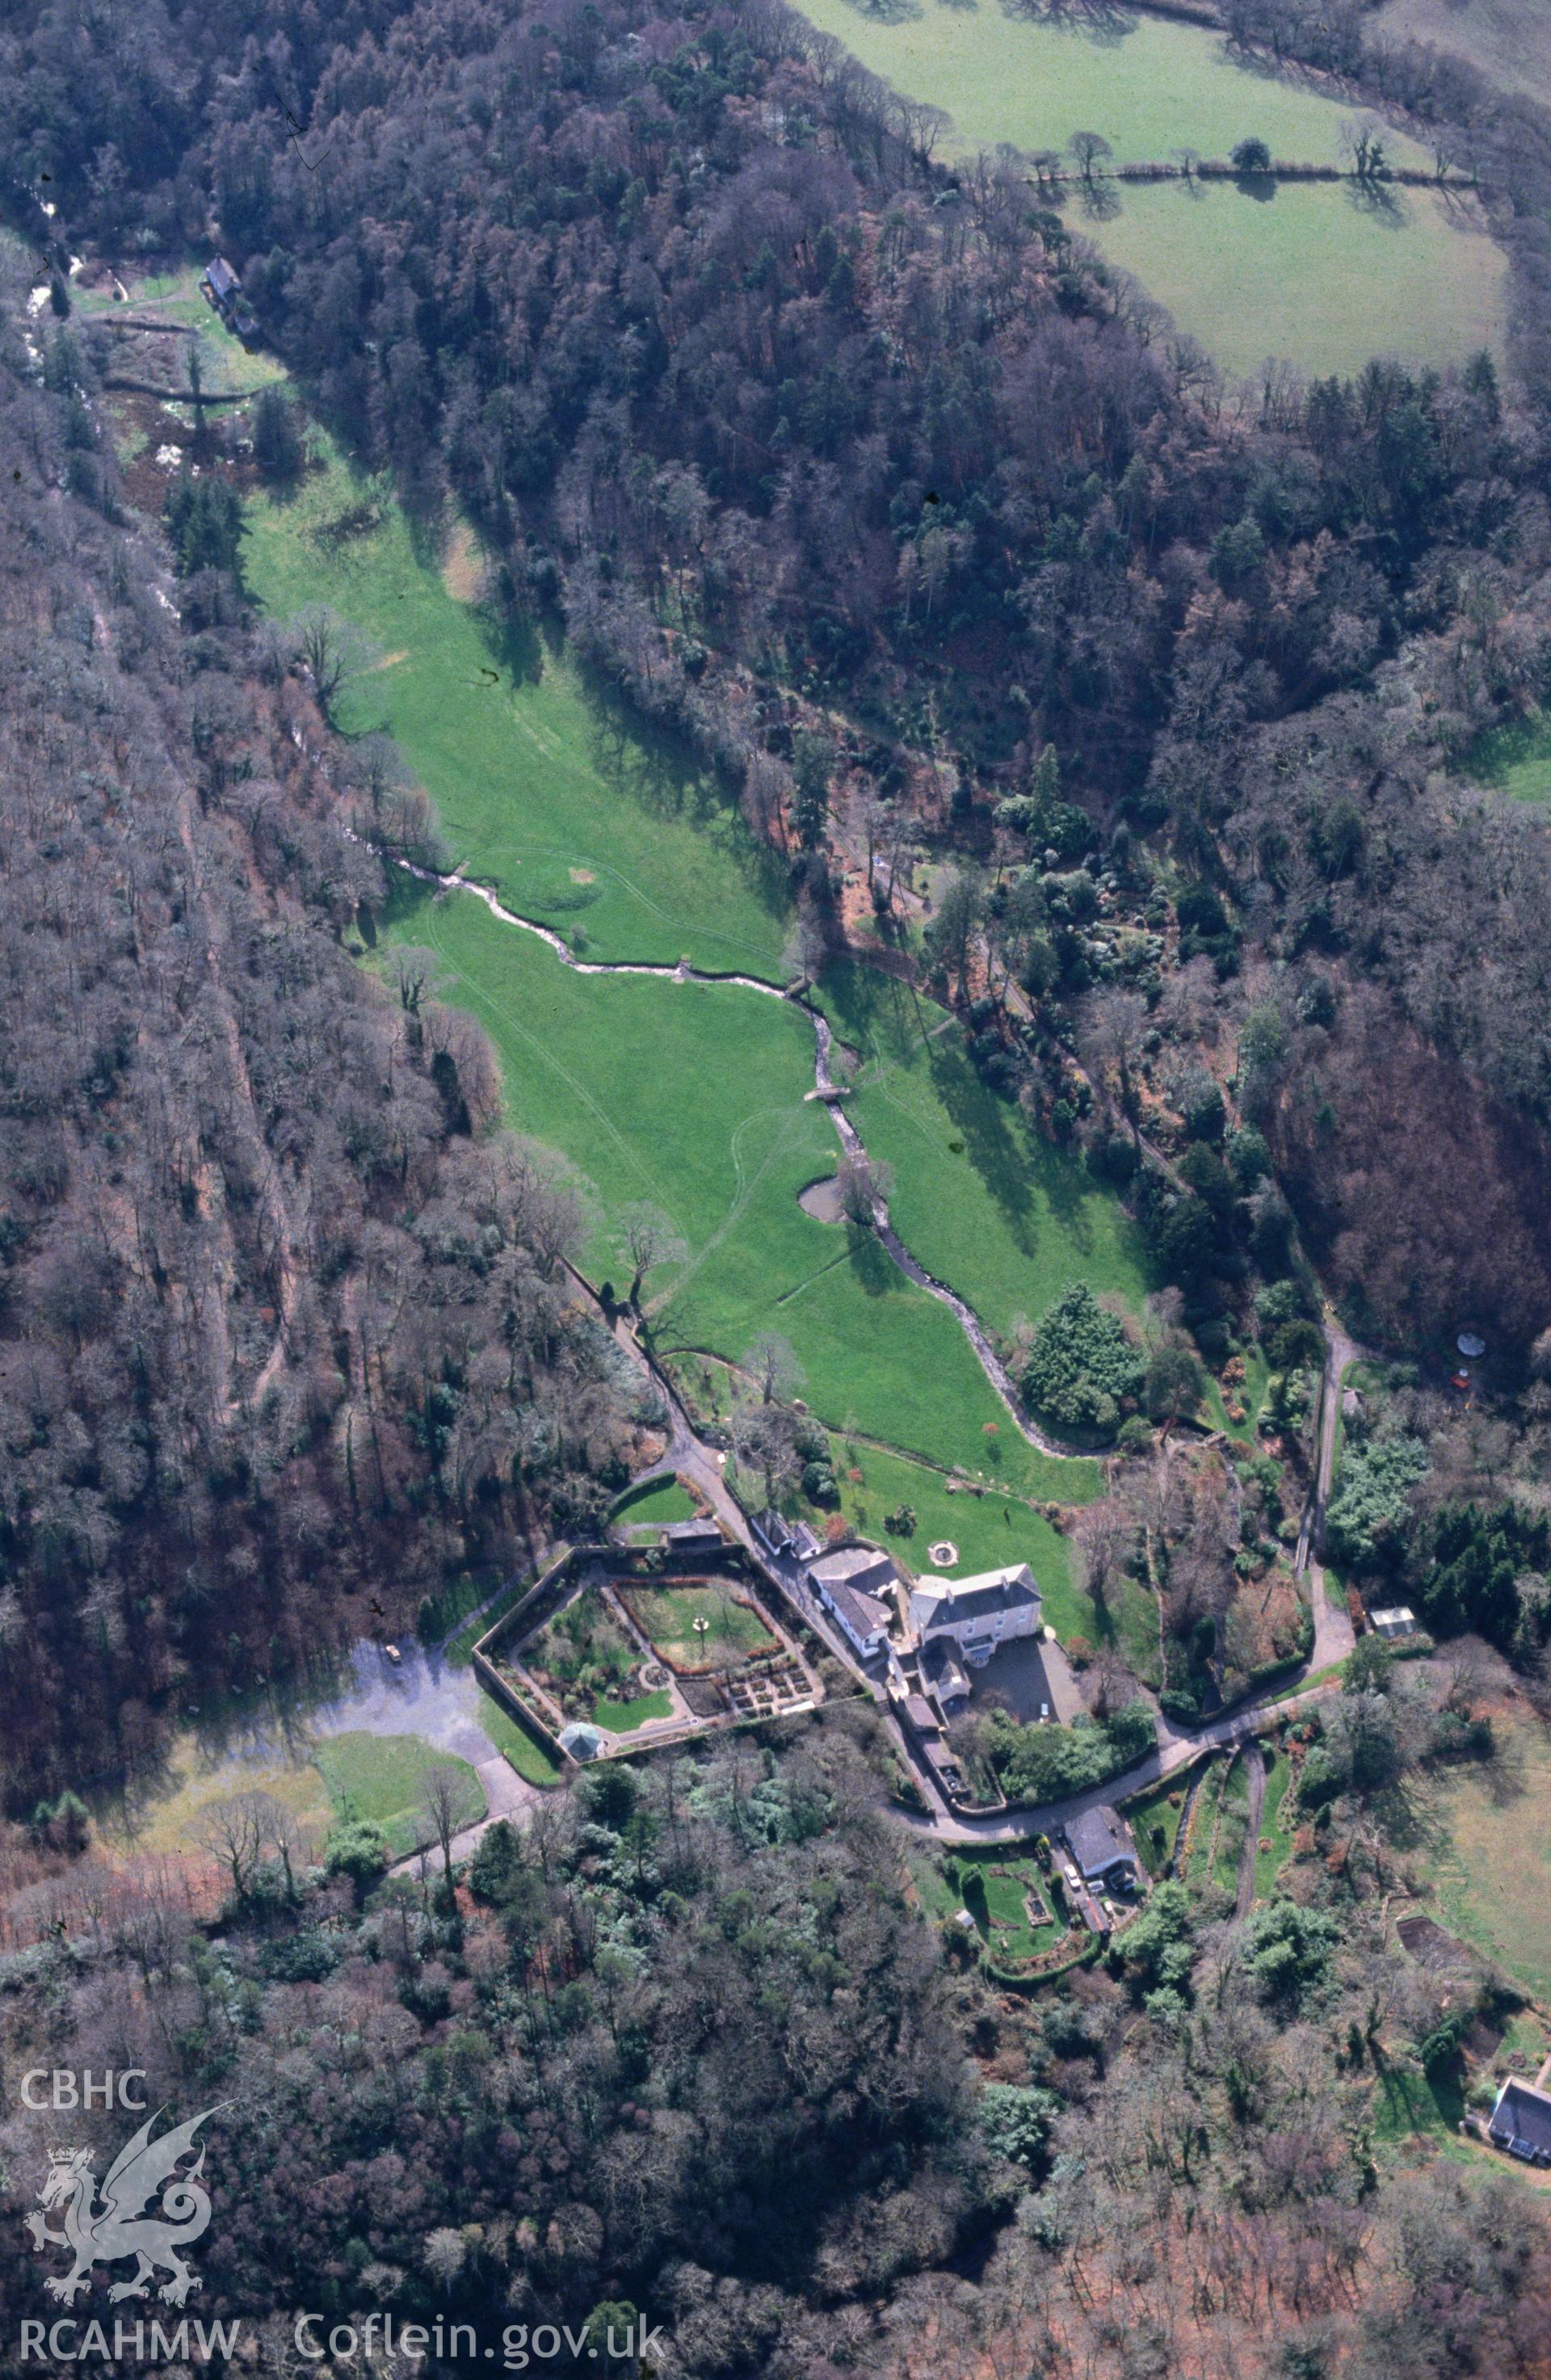 Slide of RCAHMW colour oblique aerial photograph of Colby Lodge, taken by C.R. Musson, 28/2/1993.